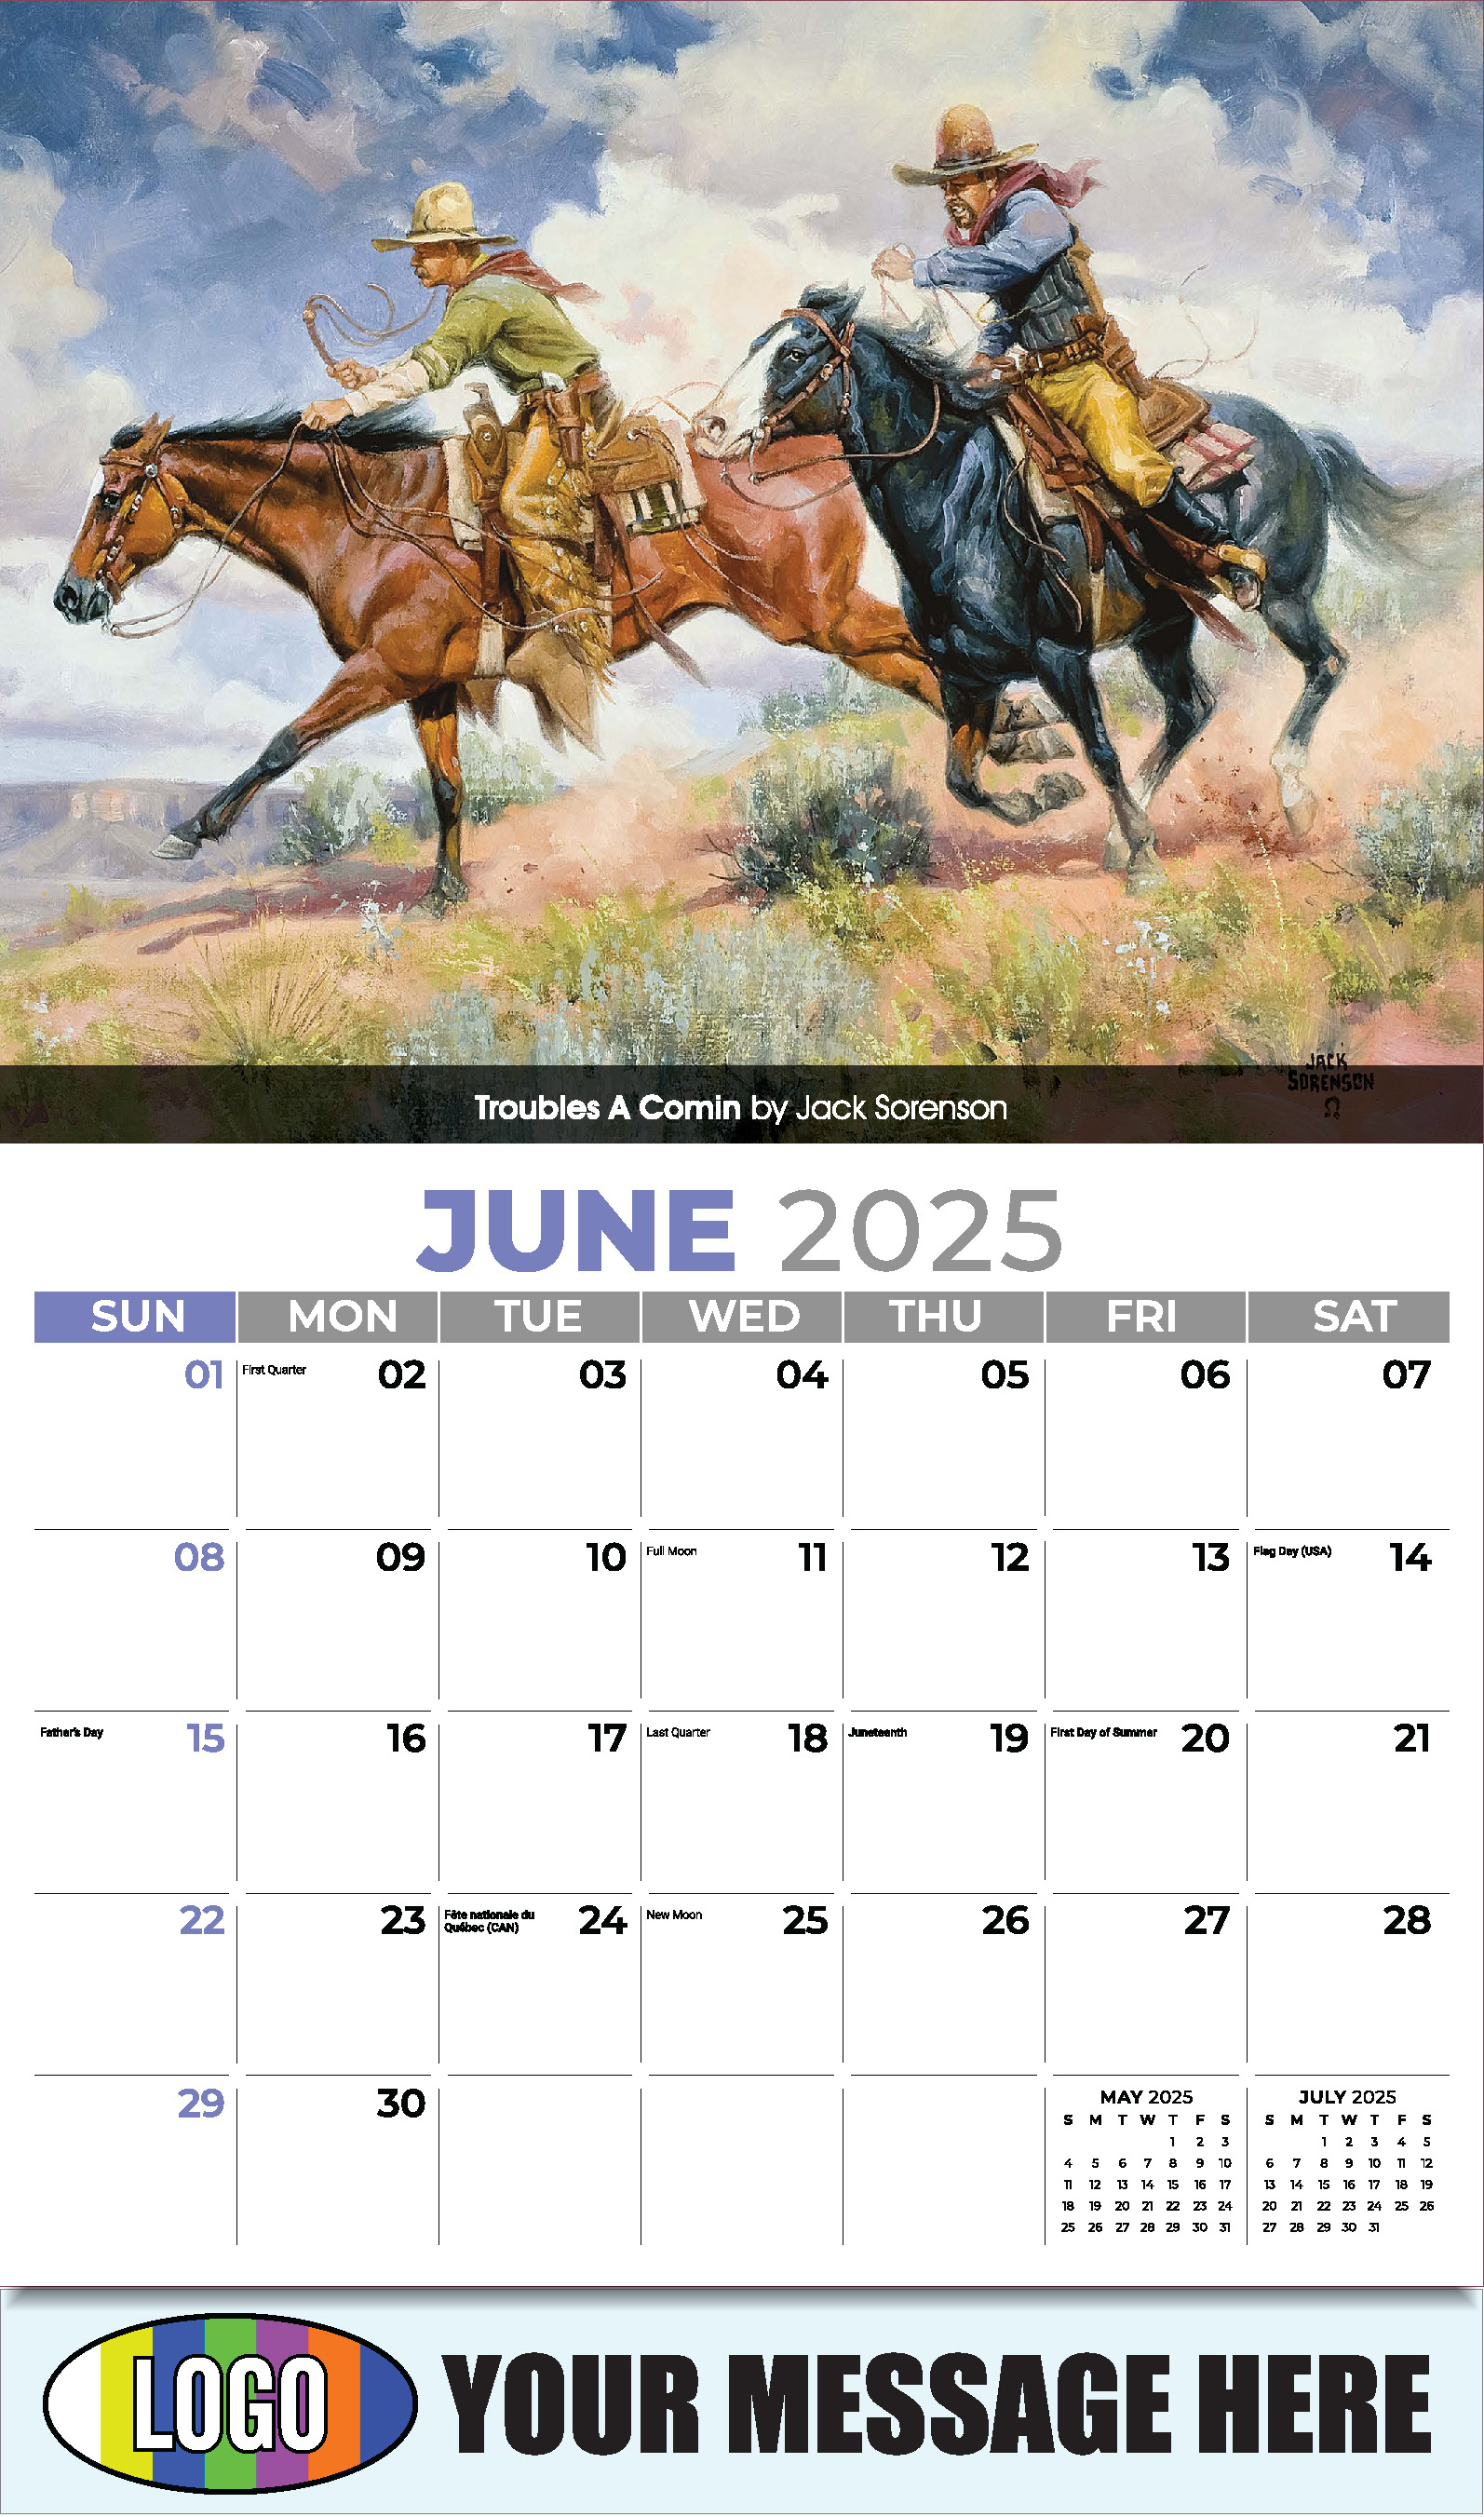 Spirit of the Old West 2025 Old West Art Business Promo Wall Calendar - June